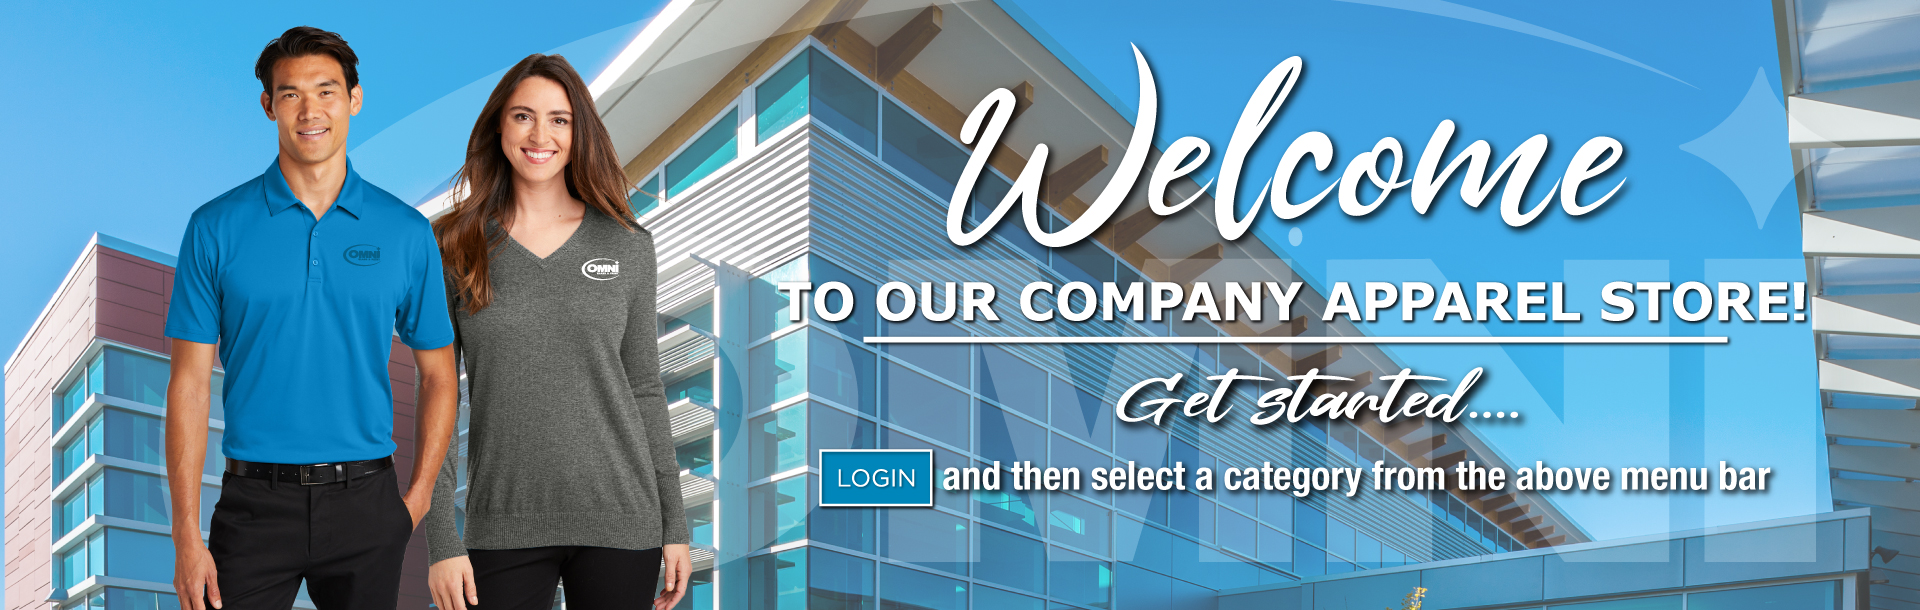 Welcome to our company apparel store! Log in and then select a category from the above menu bar.